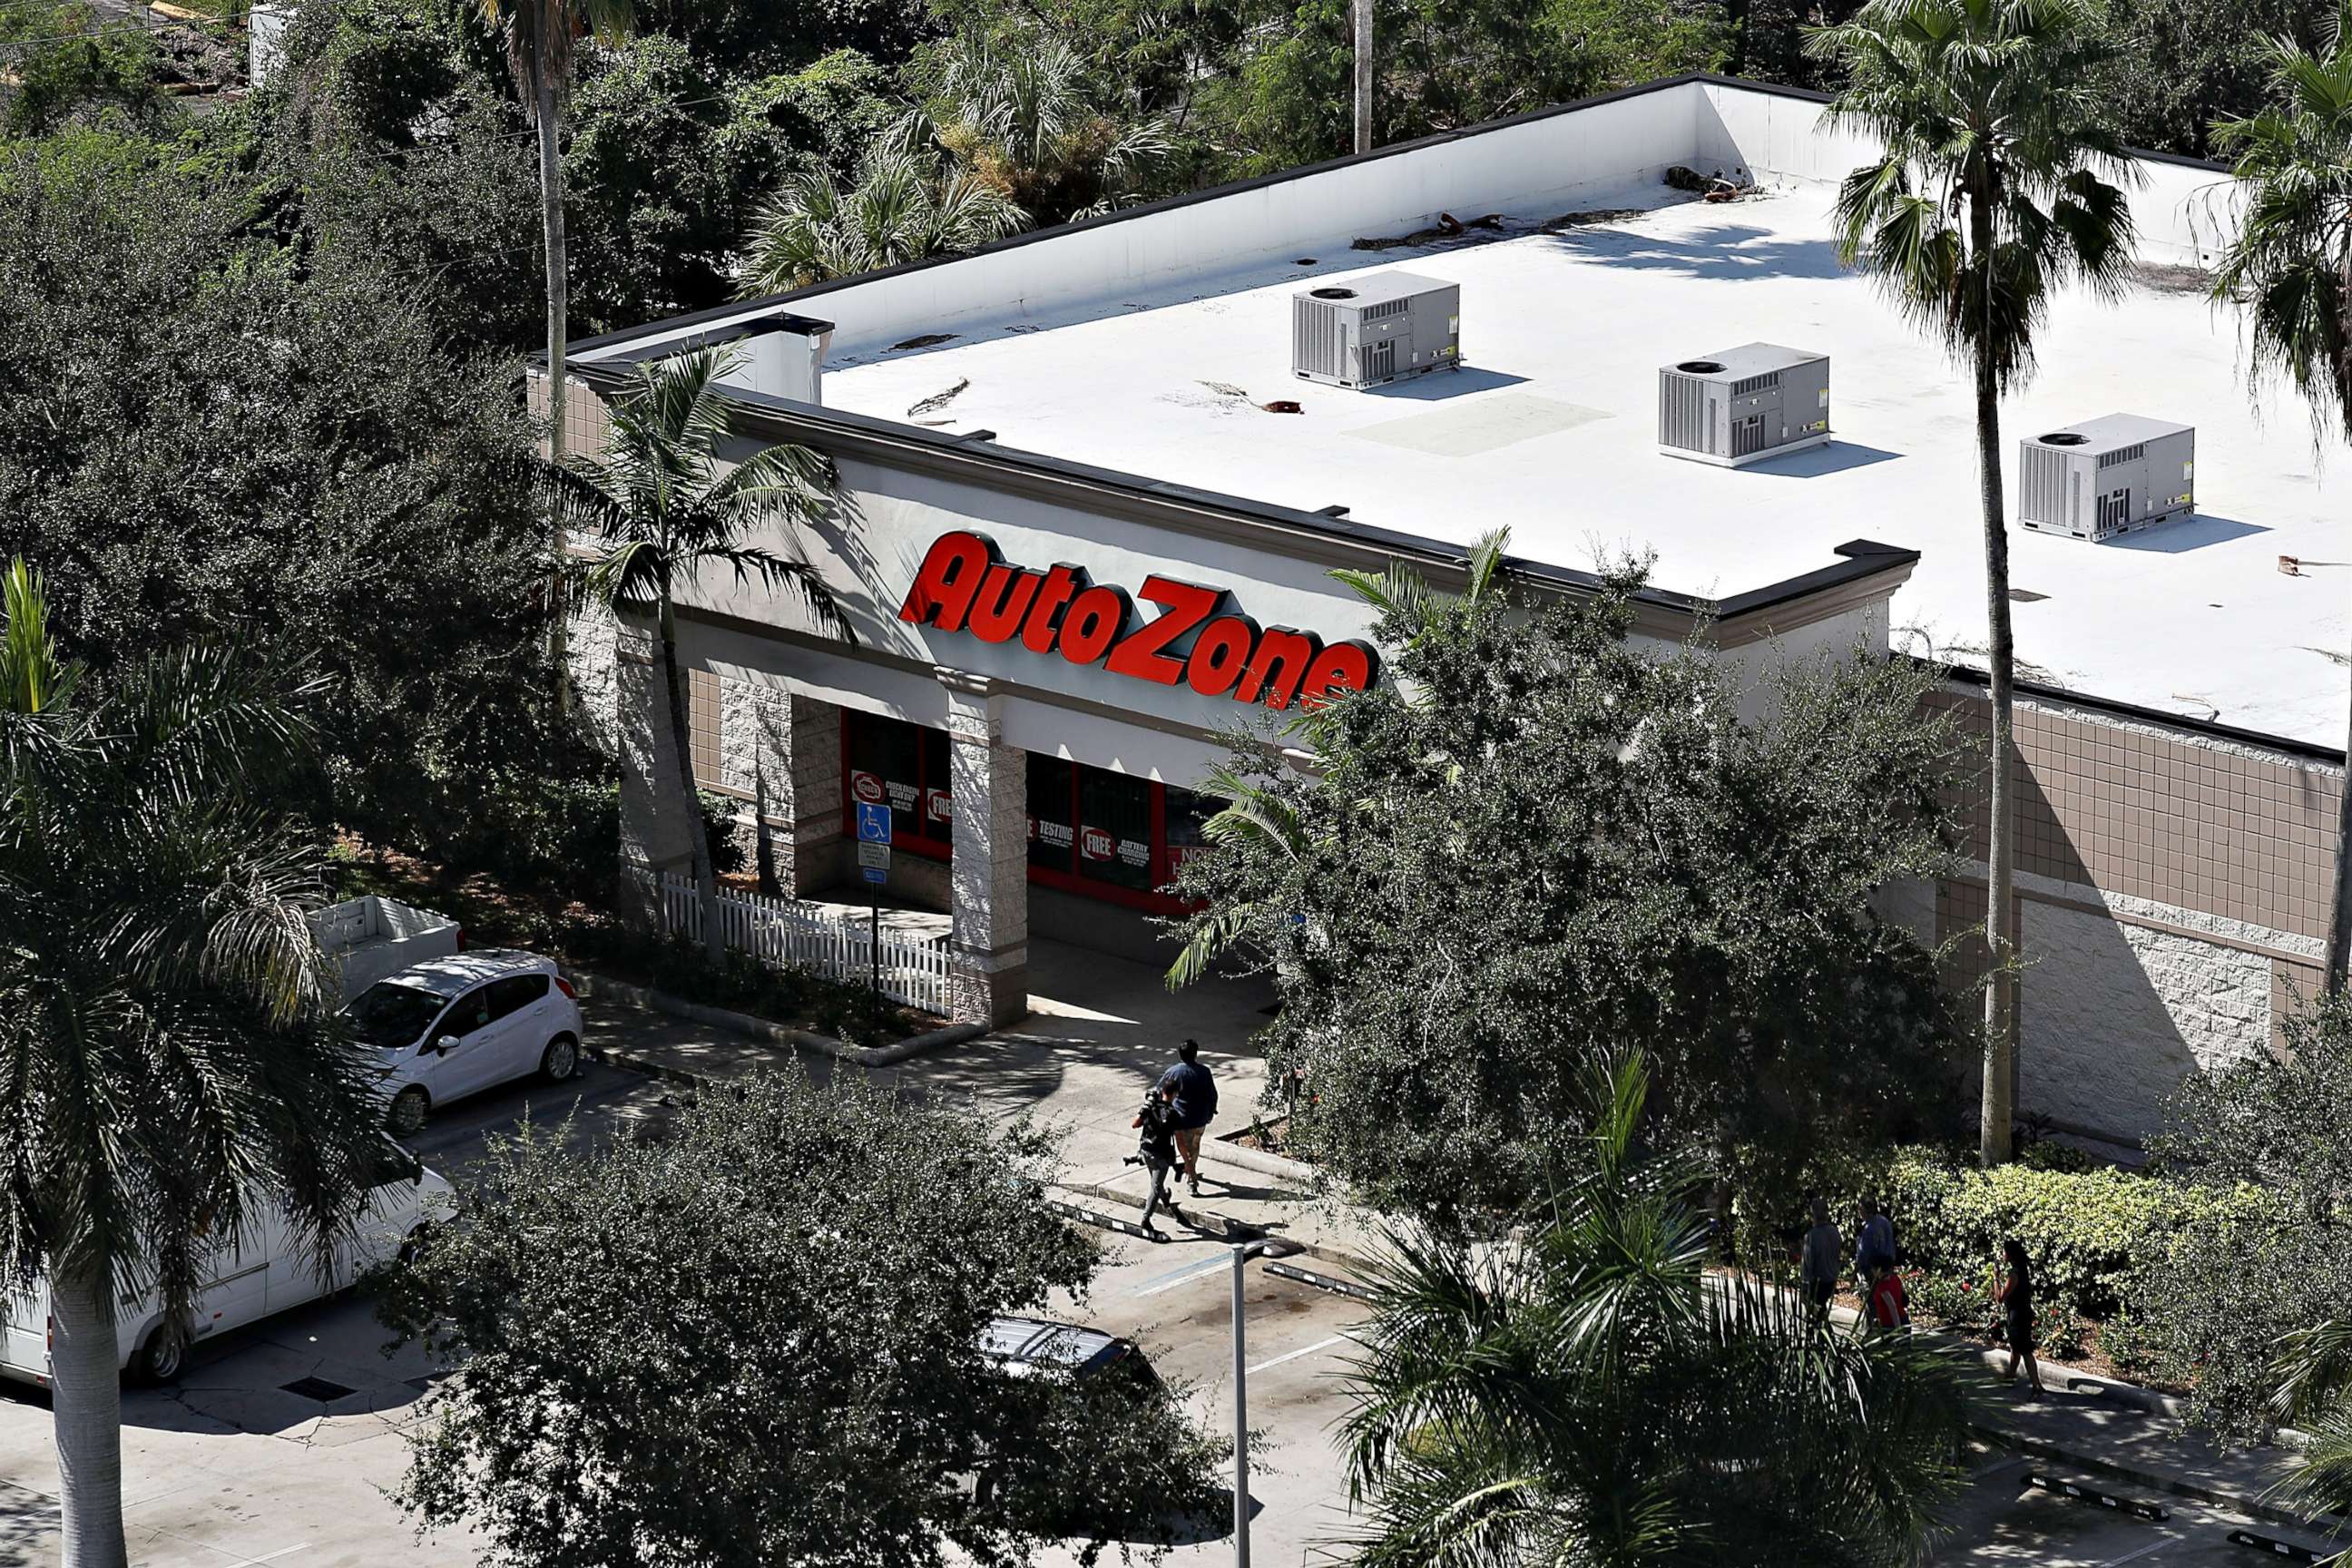 PHOTO: The AutoZone at 801 S. State Road 7 where Cesar Sayoc, a 56-year-old man from Aventura, Fla., was arrested in the possible connection with pipe bombs being mailed to critics of President Donald Trump on Oct. 26, 2018 in Plantation, Fla. 